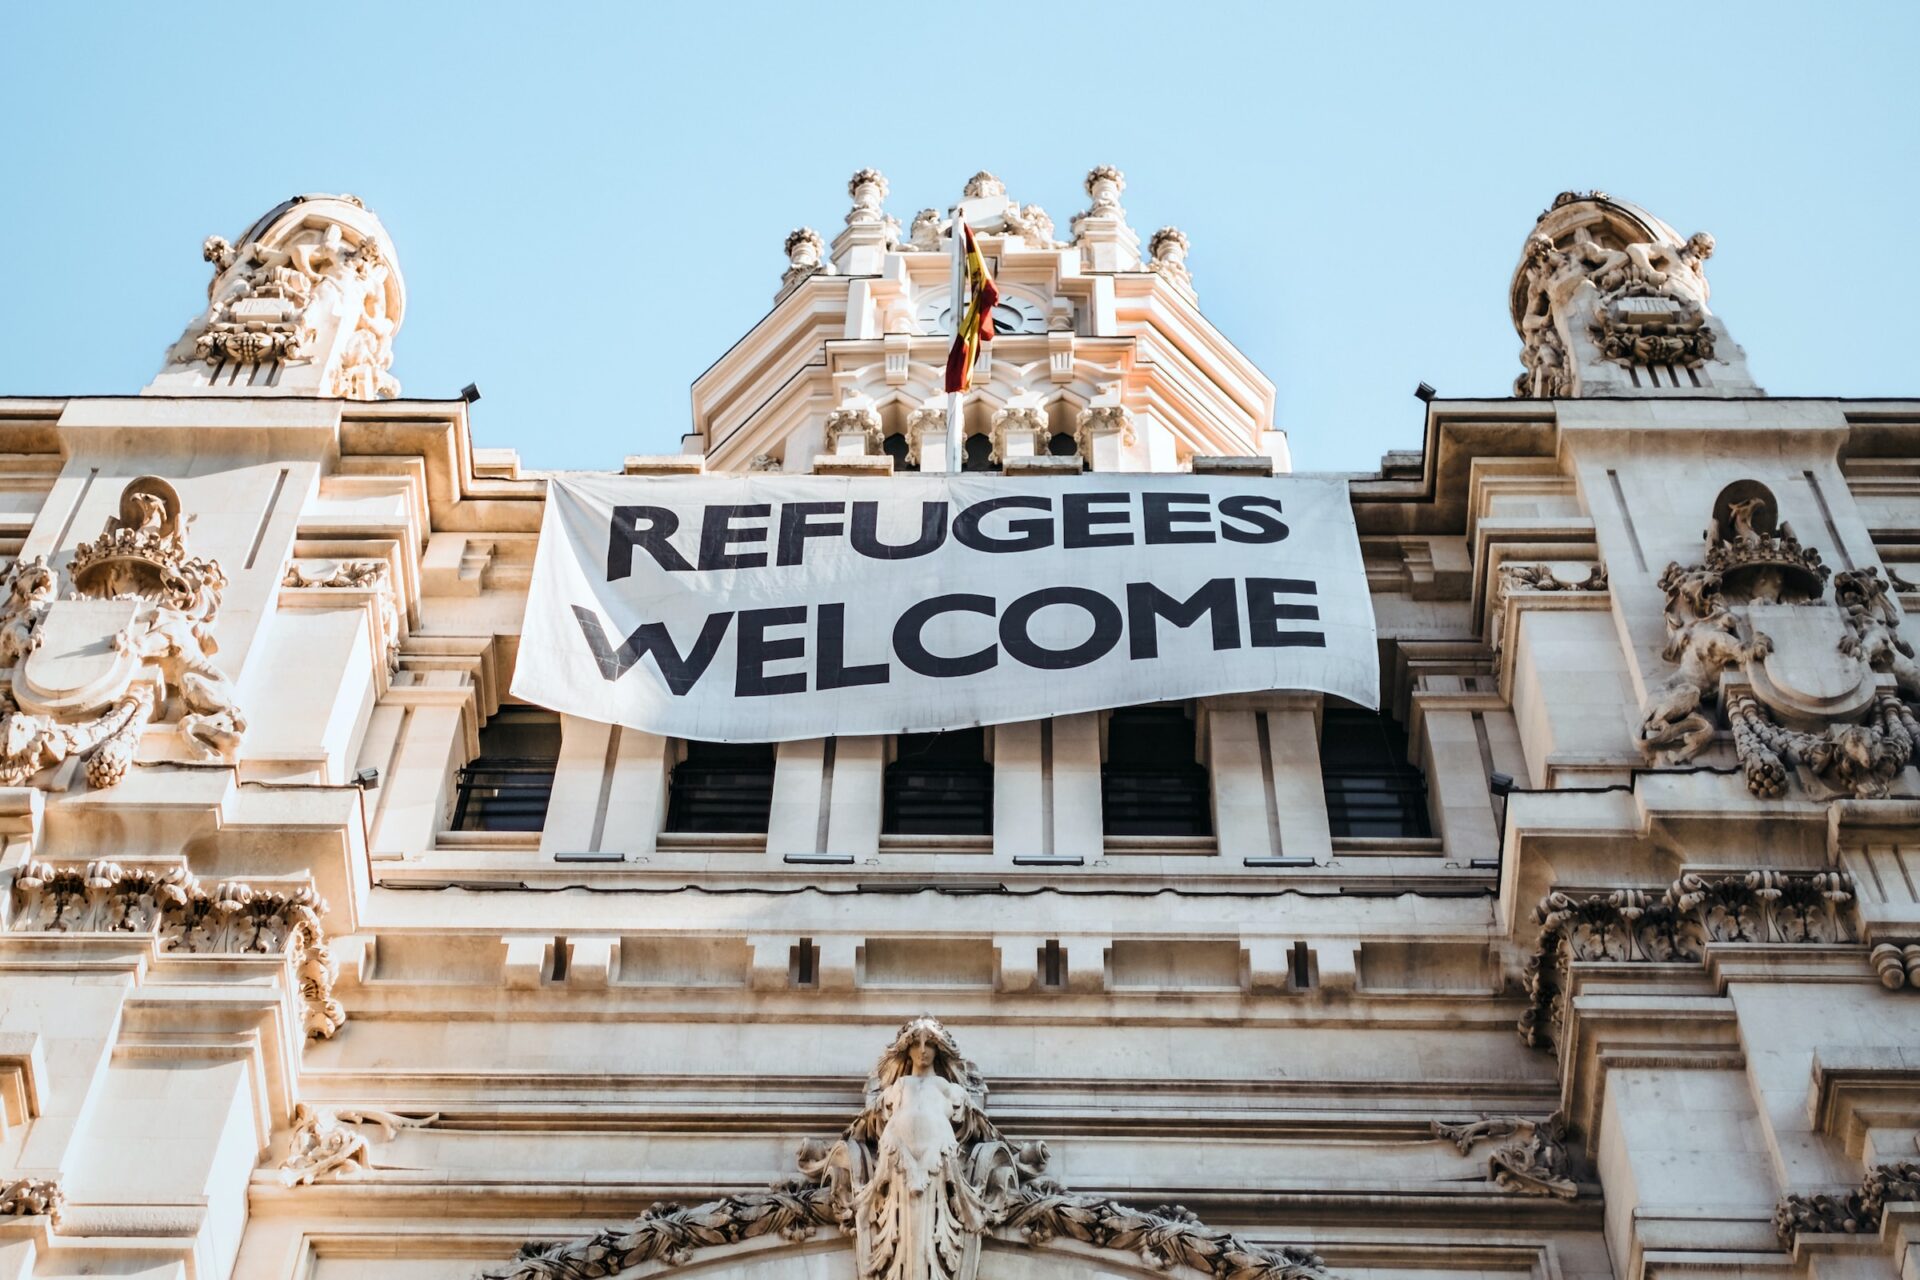 In Madrid, Spain, a building bears a banner that says "refugees welcome" (Maria Teneva/Unsplash)